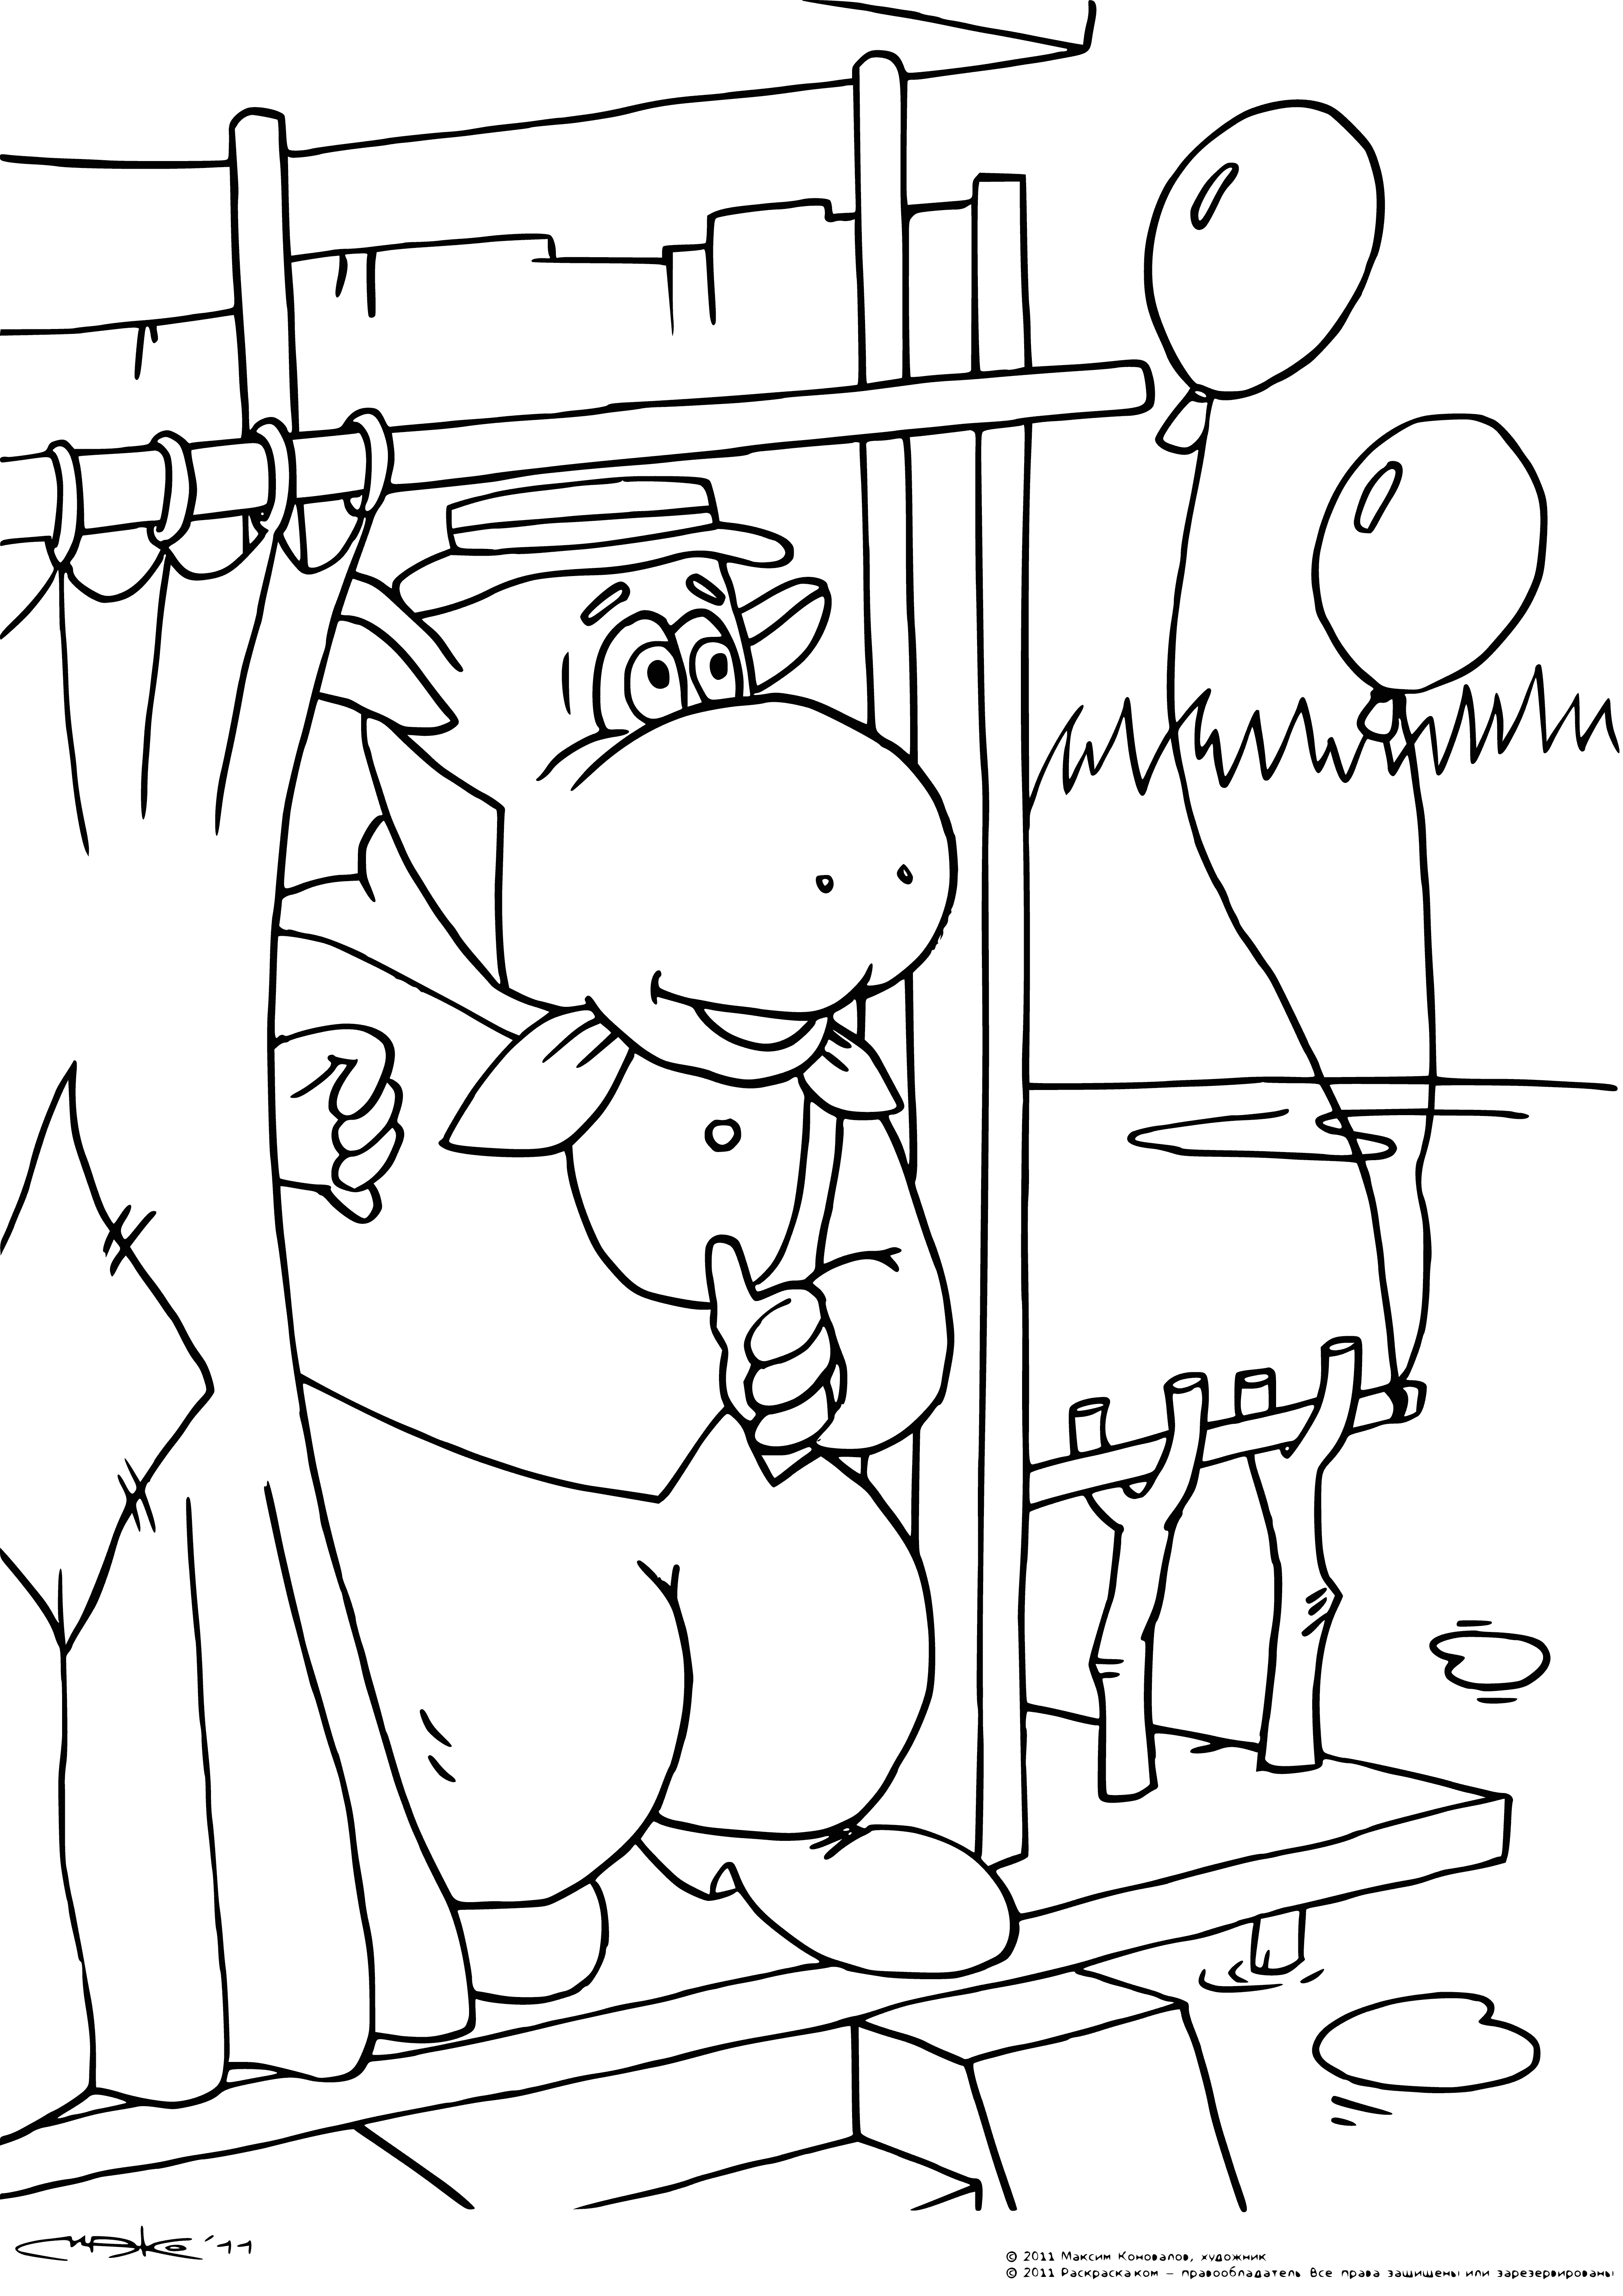 coloring page: Hippo holds yellow ball in mouth, other two balls blue & green.